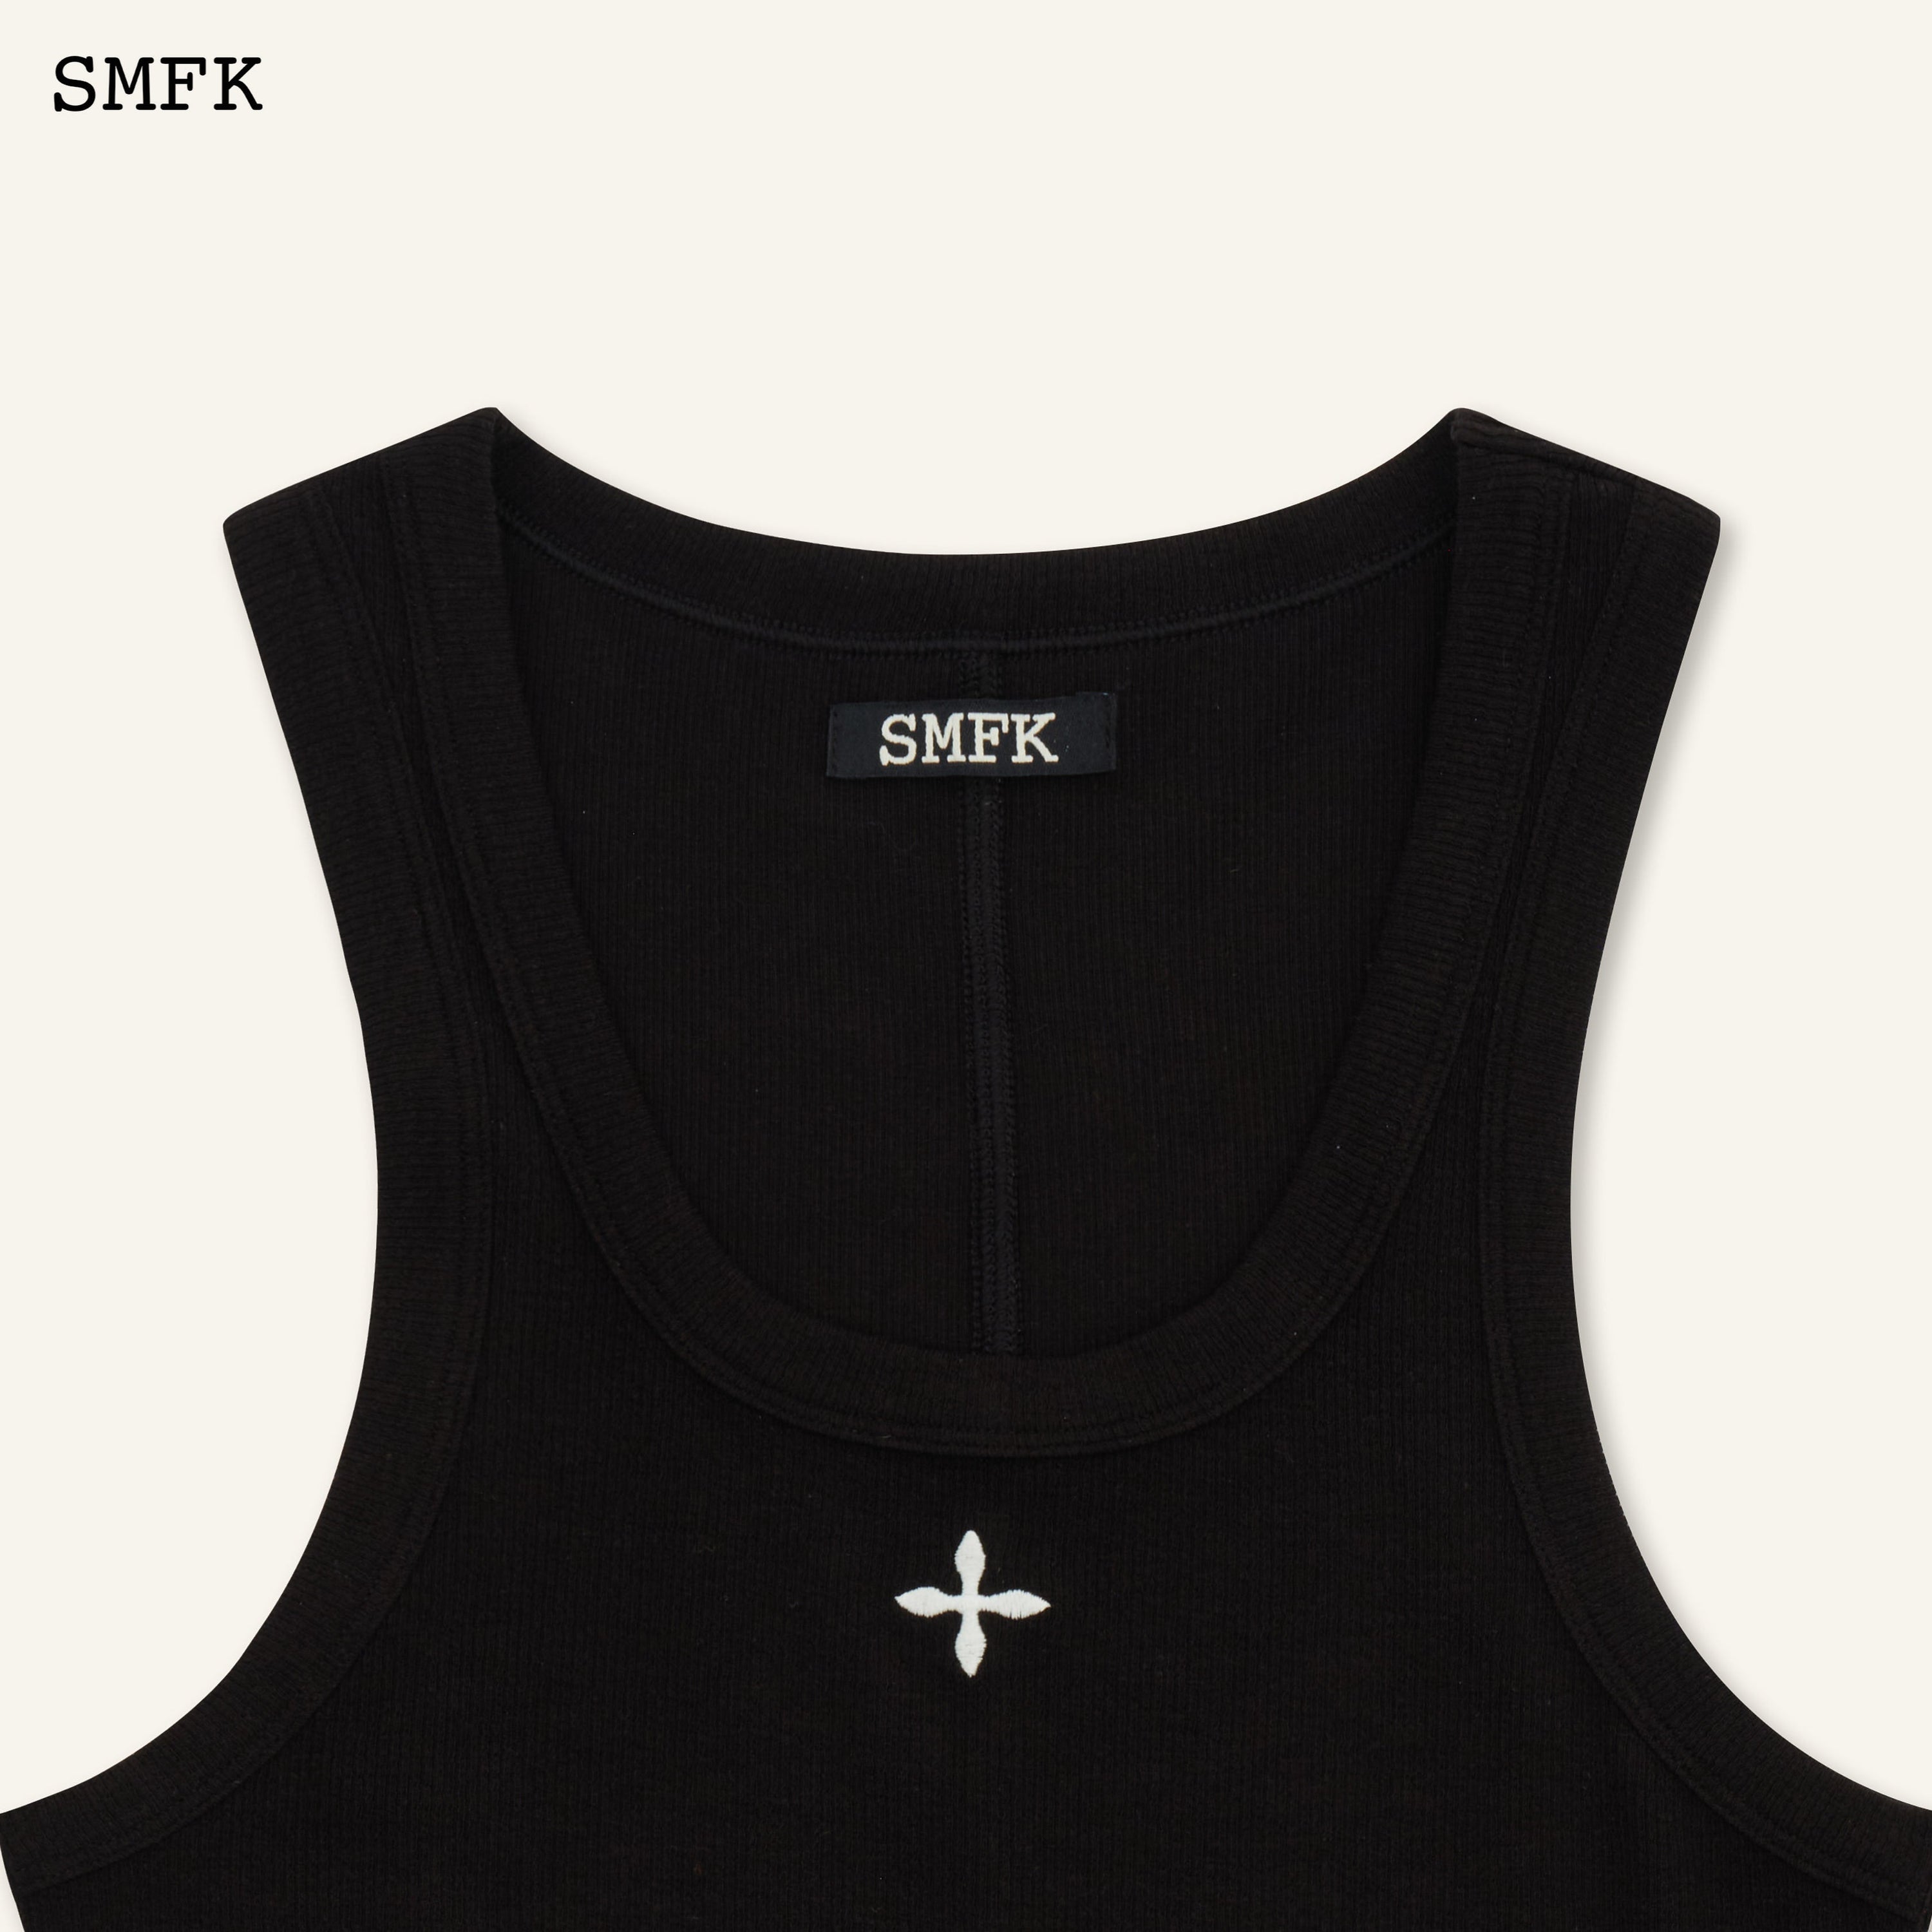 Compass Rove Stray Vest Dress In Black - SMFK Official